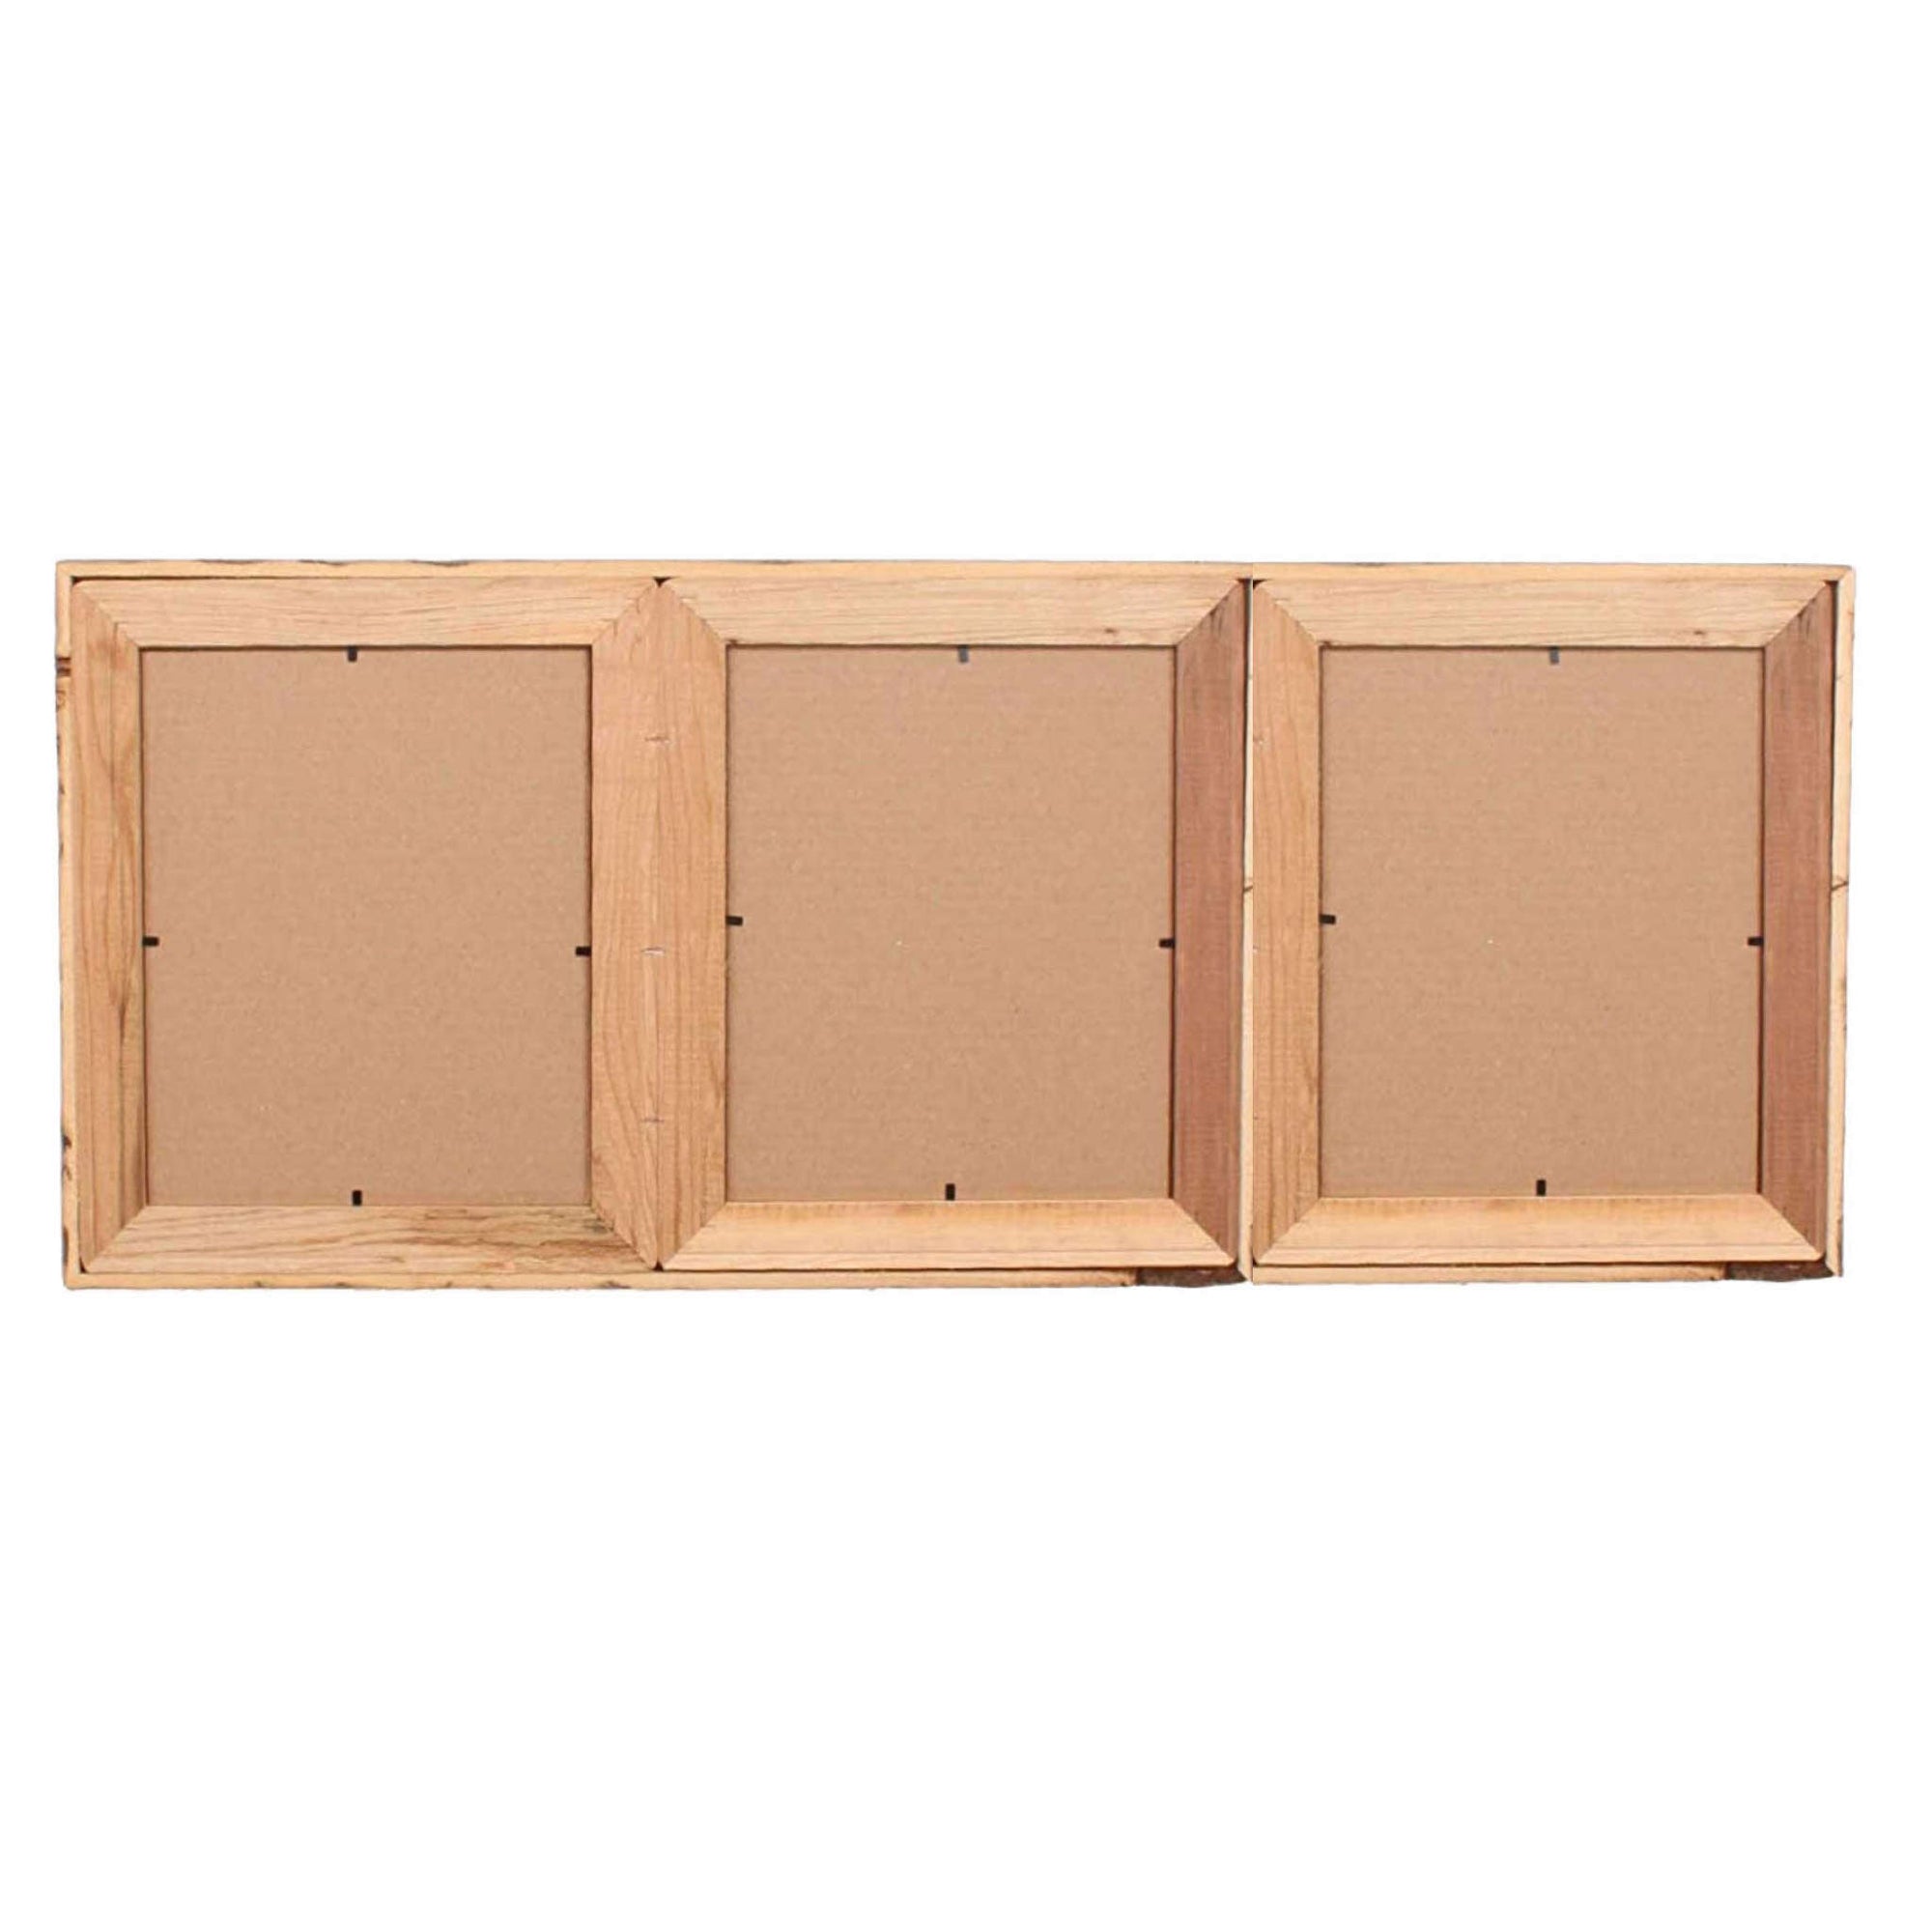 Multi Opening 4X6 Barnwood Panel Collage Picture Frame, Rustic Multiple  Photo Frames. 2,3,4,5,6,7,8,9 Choice of Natural or Painted Finishes. 